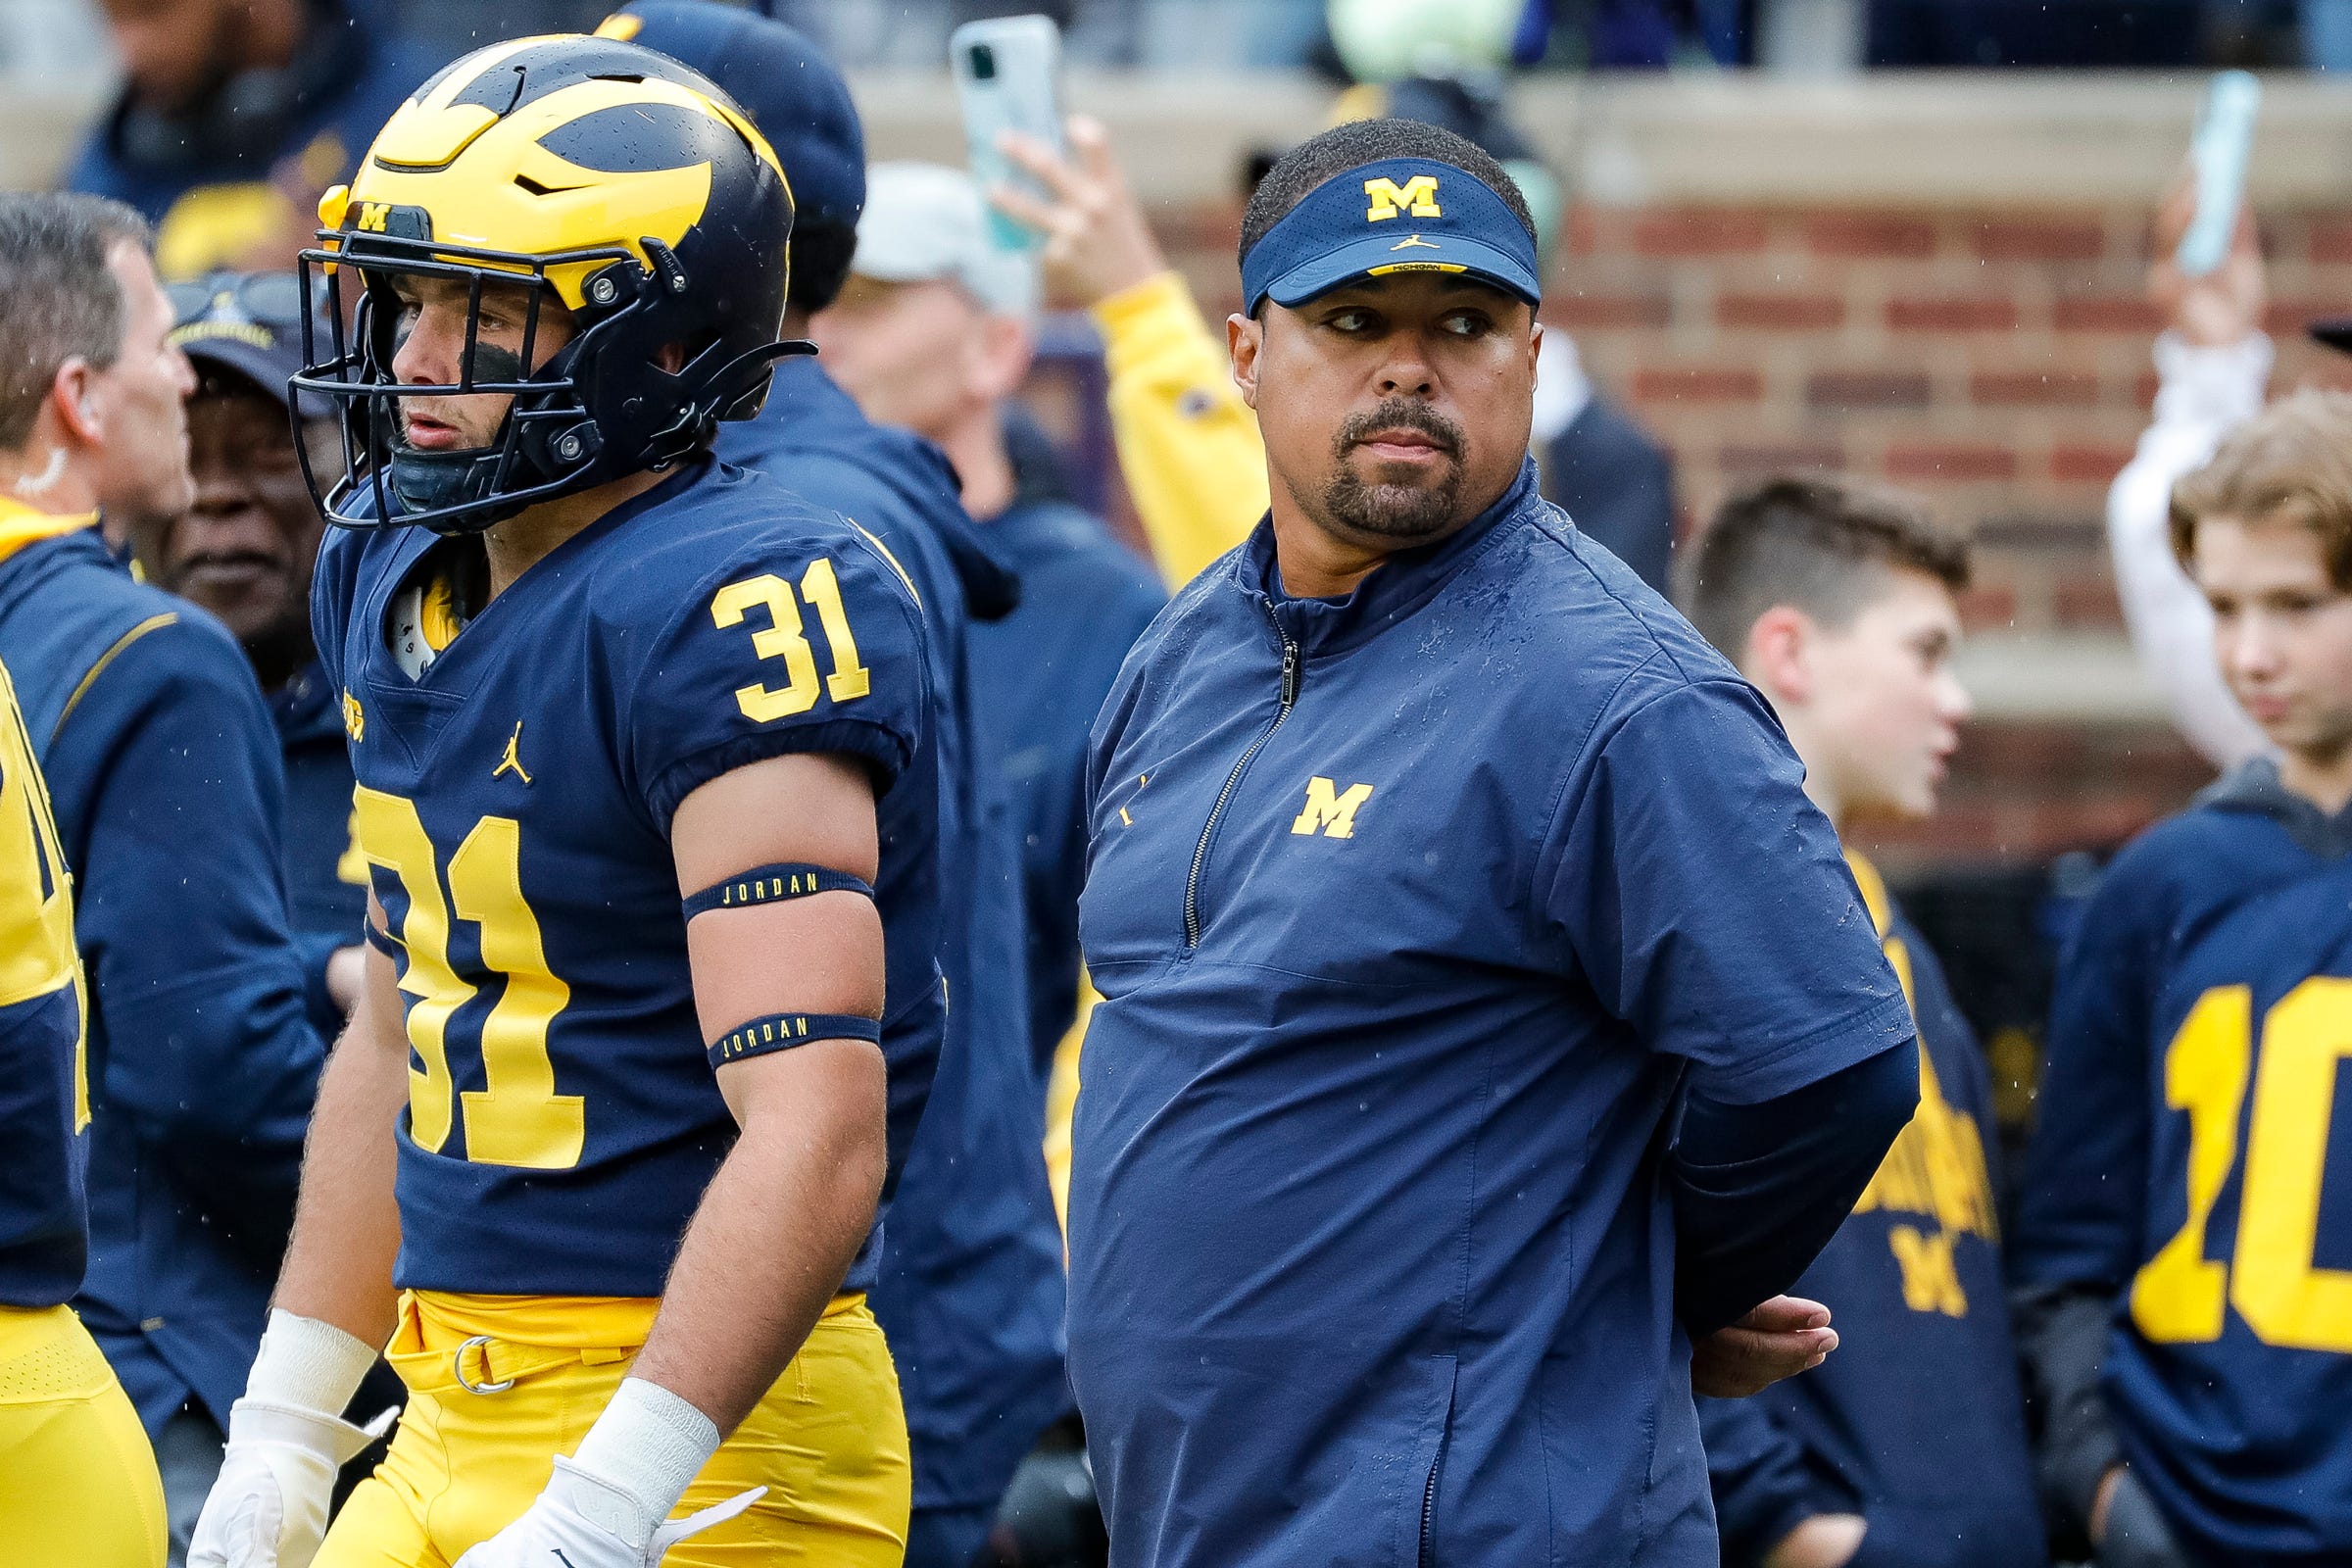 Former Michigan legend and current running backs coach Mike Hart carted off sideline with apparent seizure